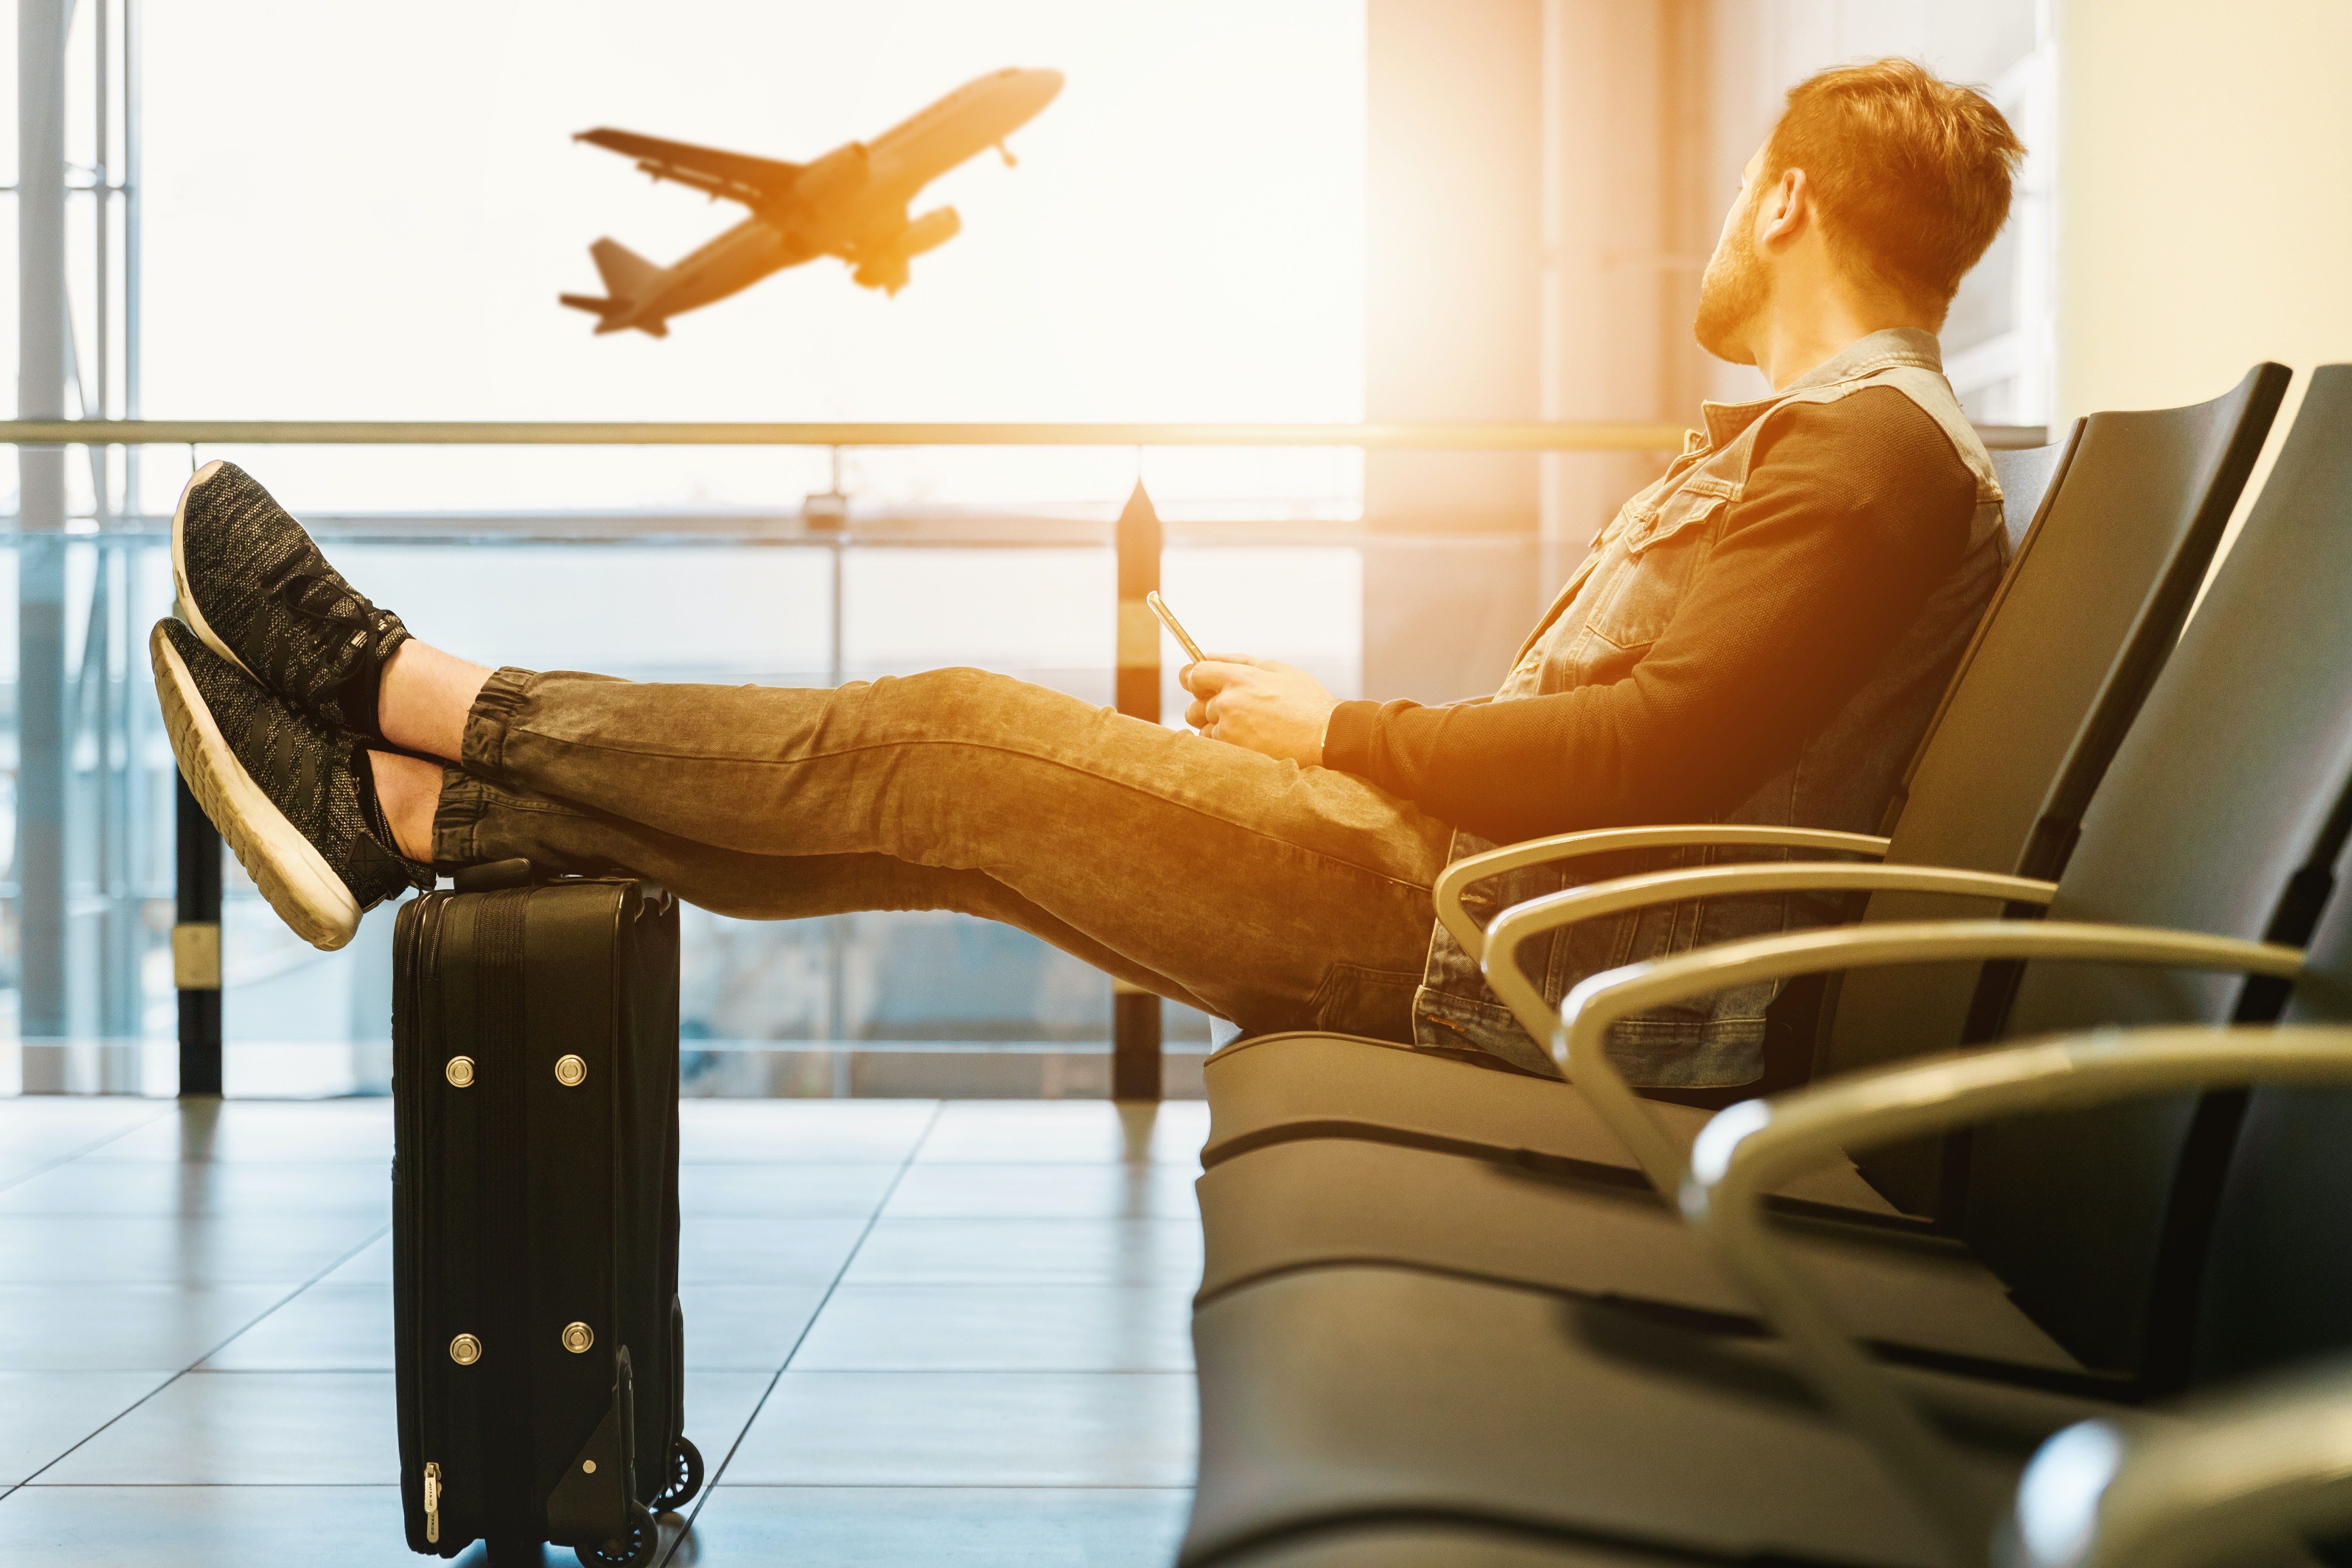 Useful tips for air travelers